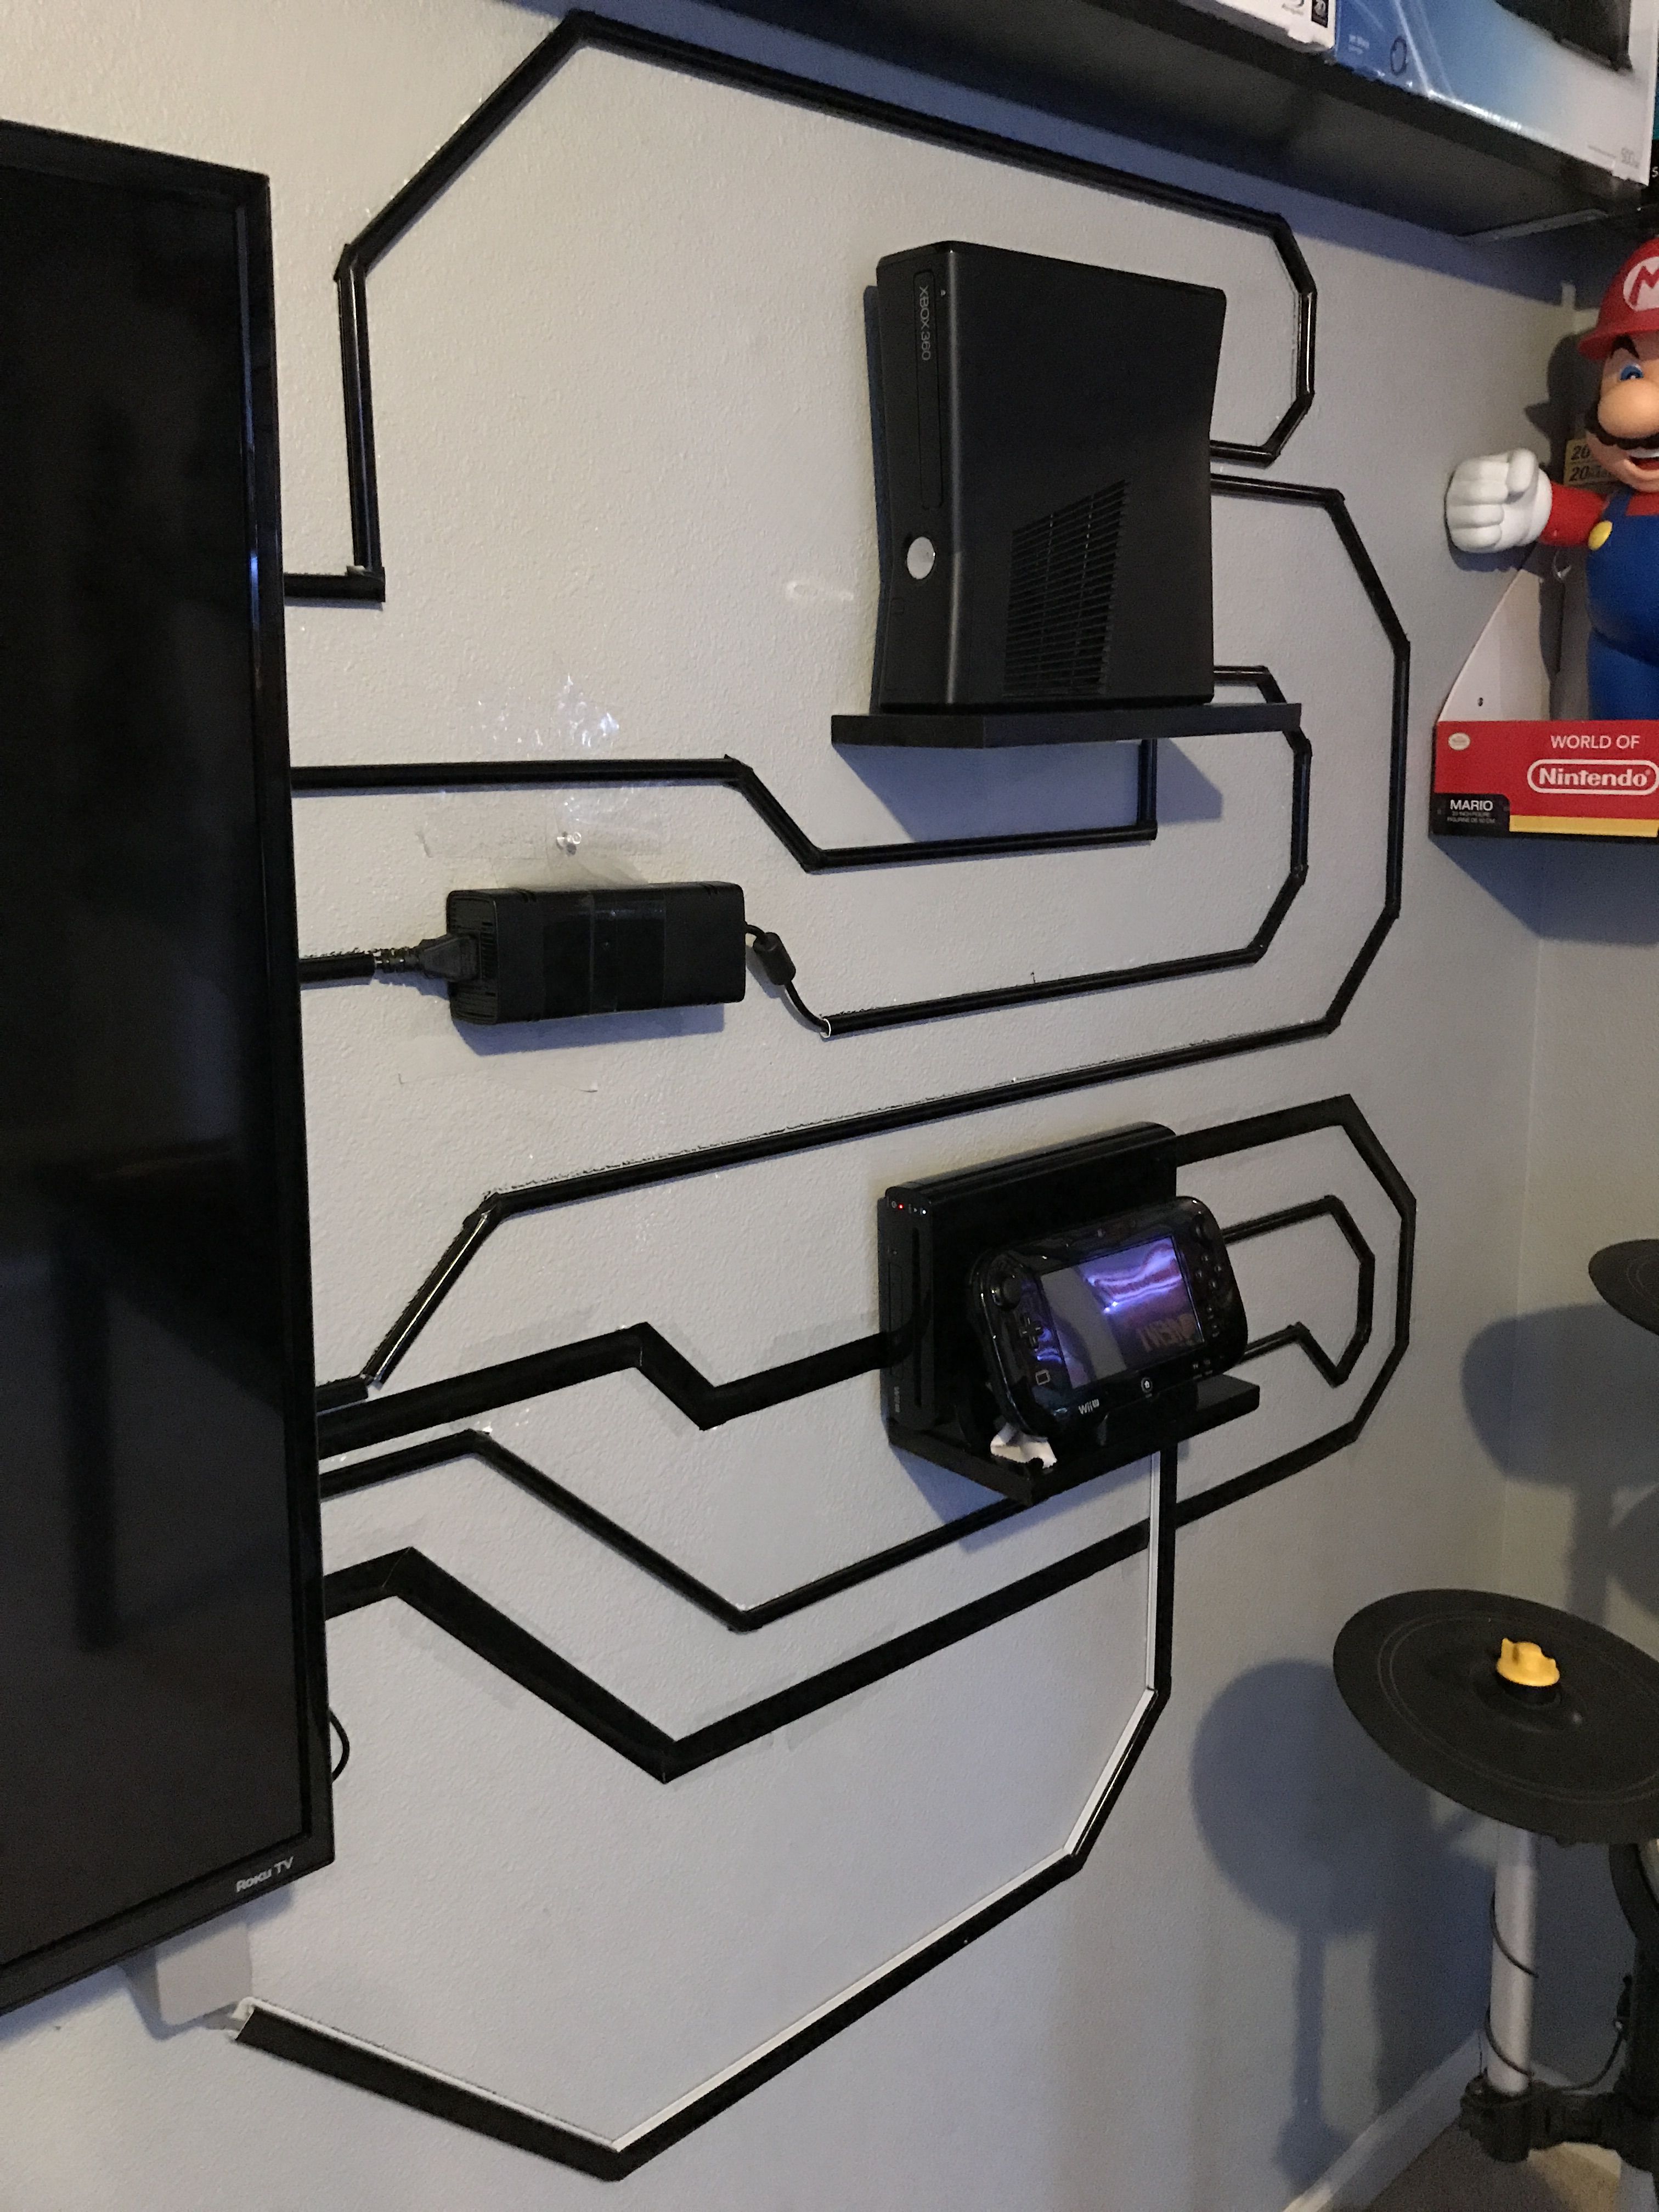 Xbox connect and installation on wall